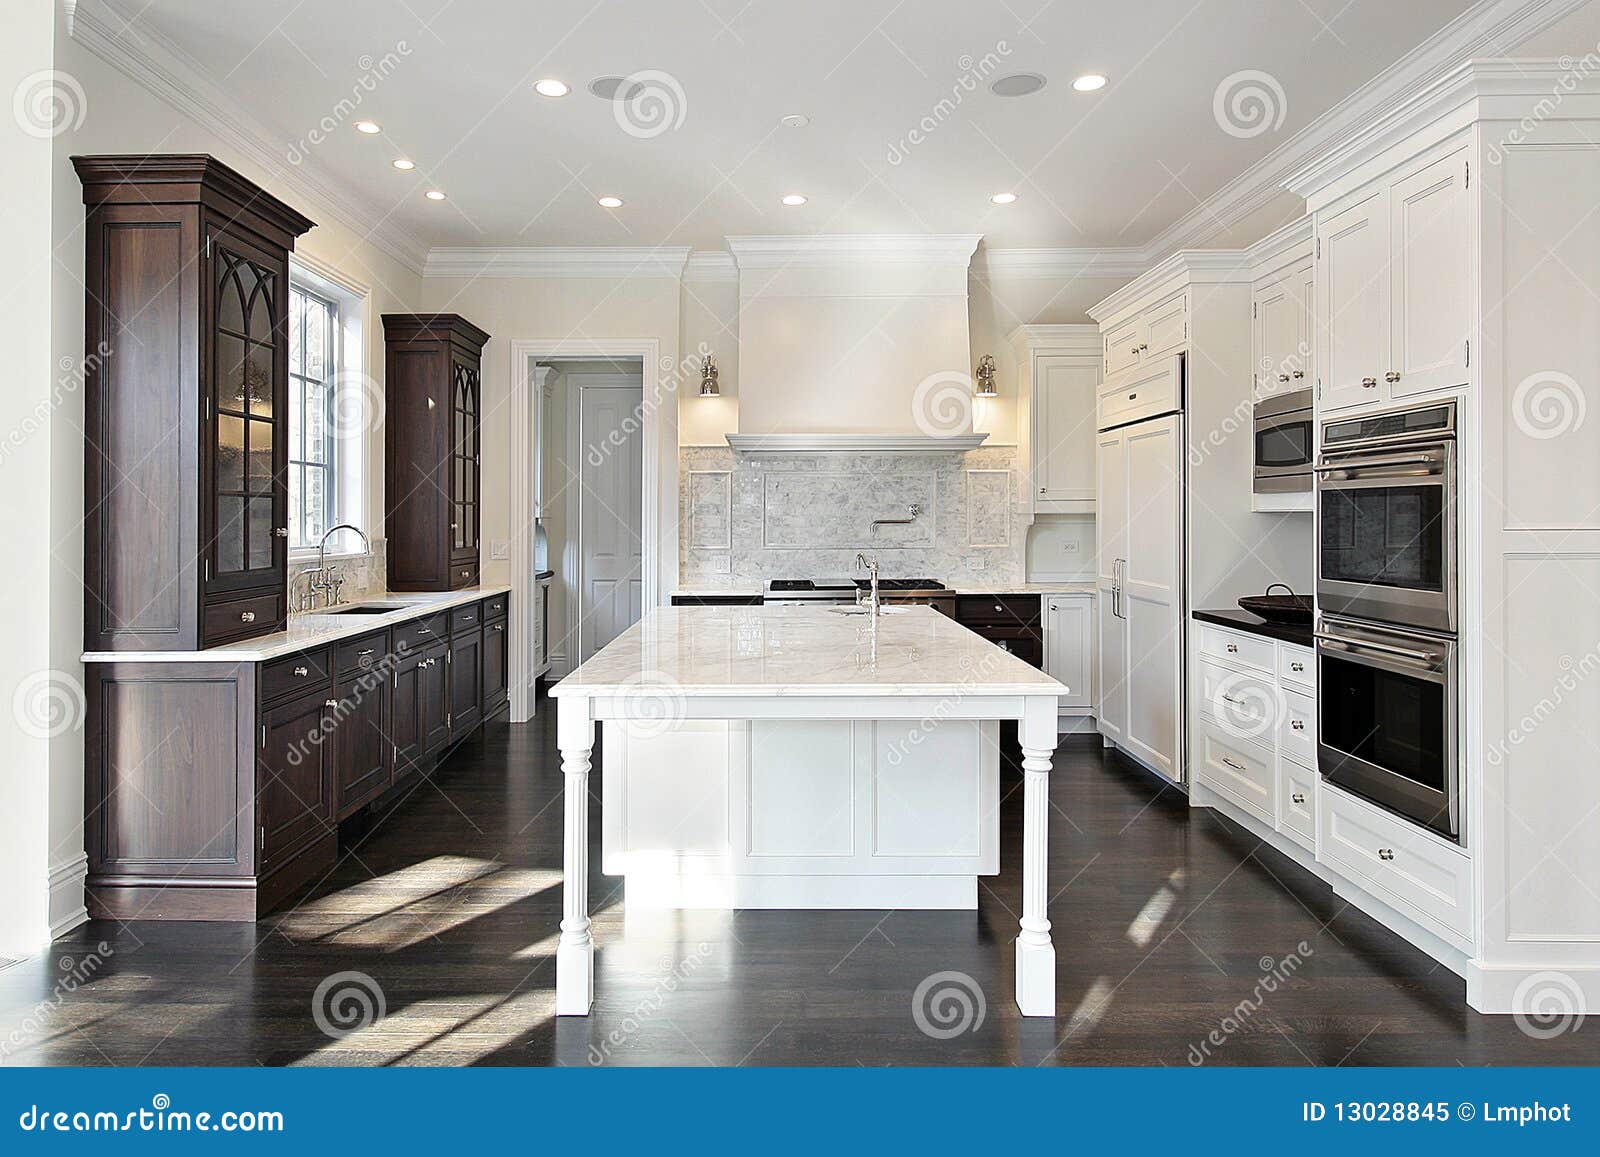 Kitchen With Dark And Light Cabinetry Stock Image Image Of